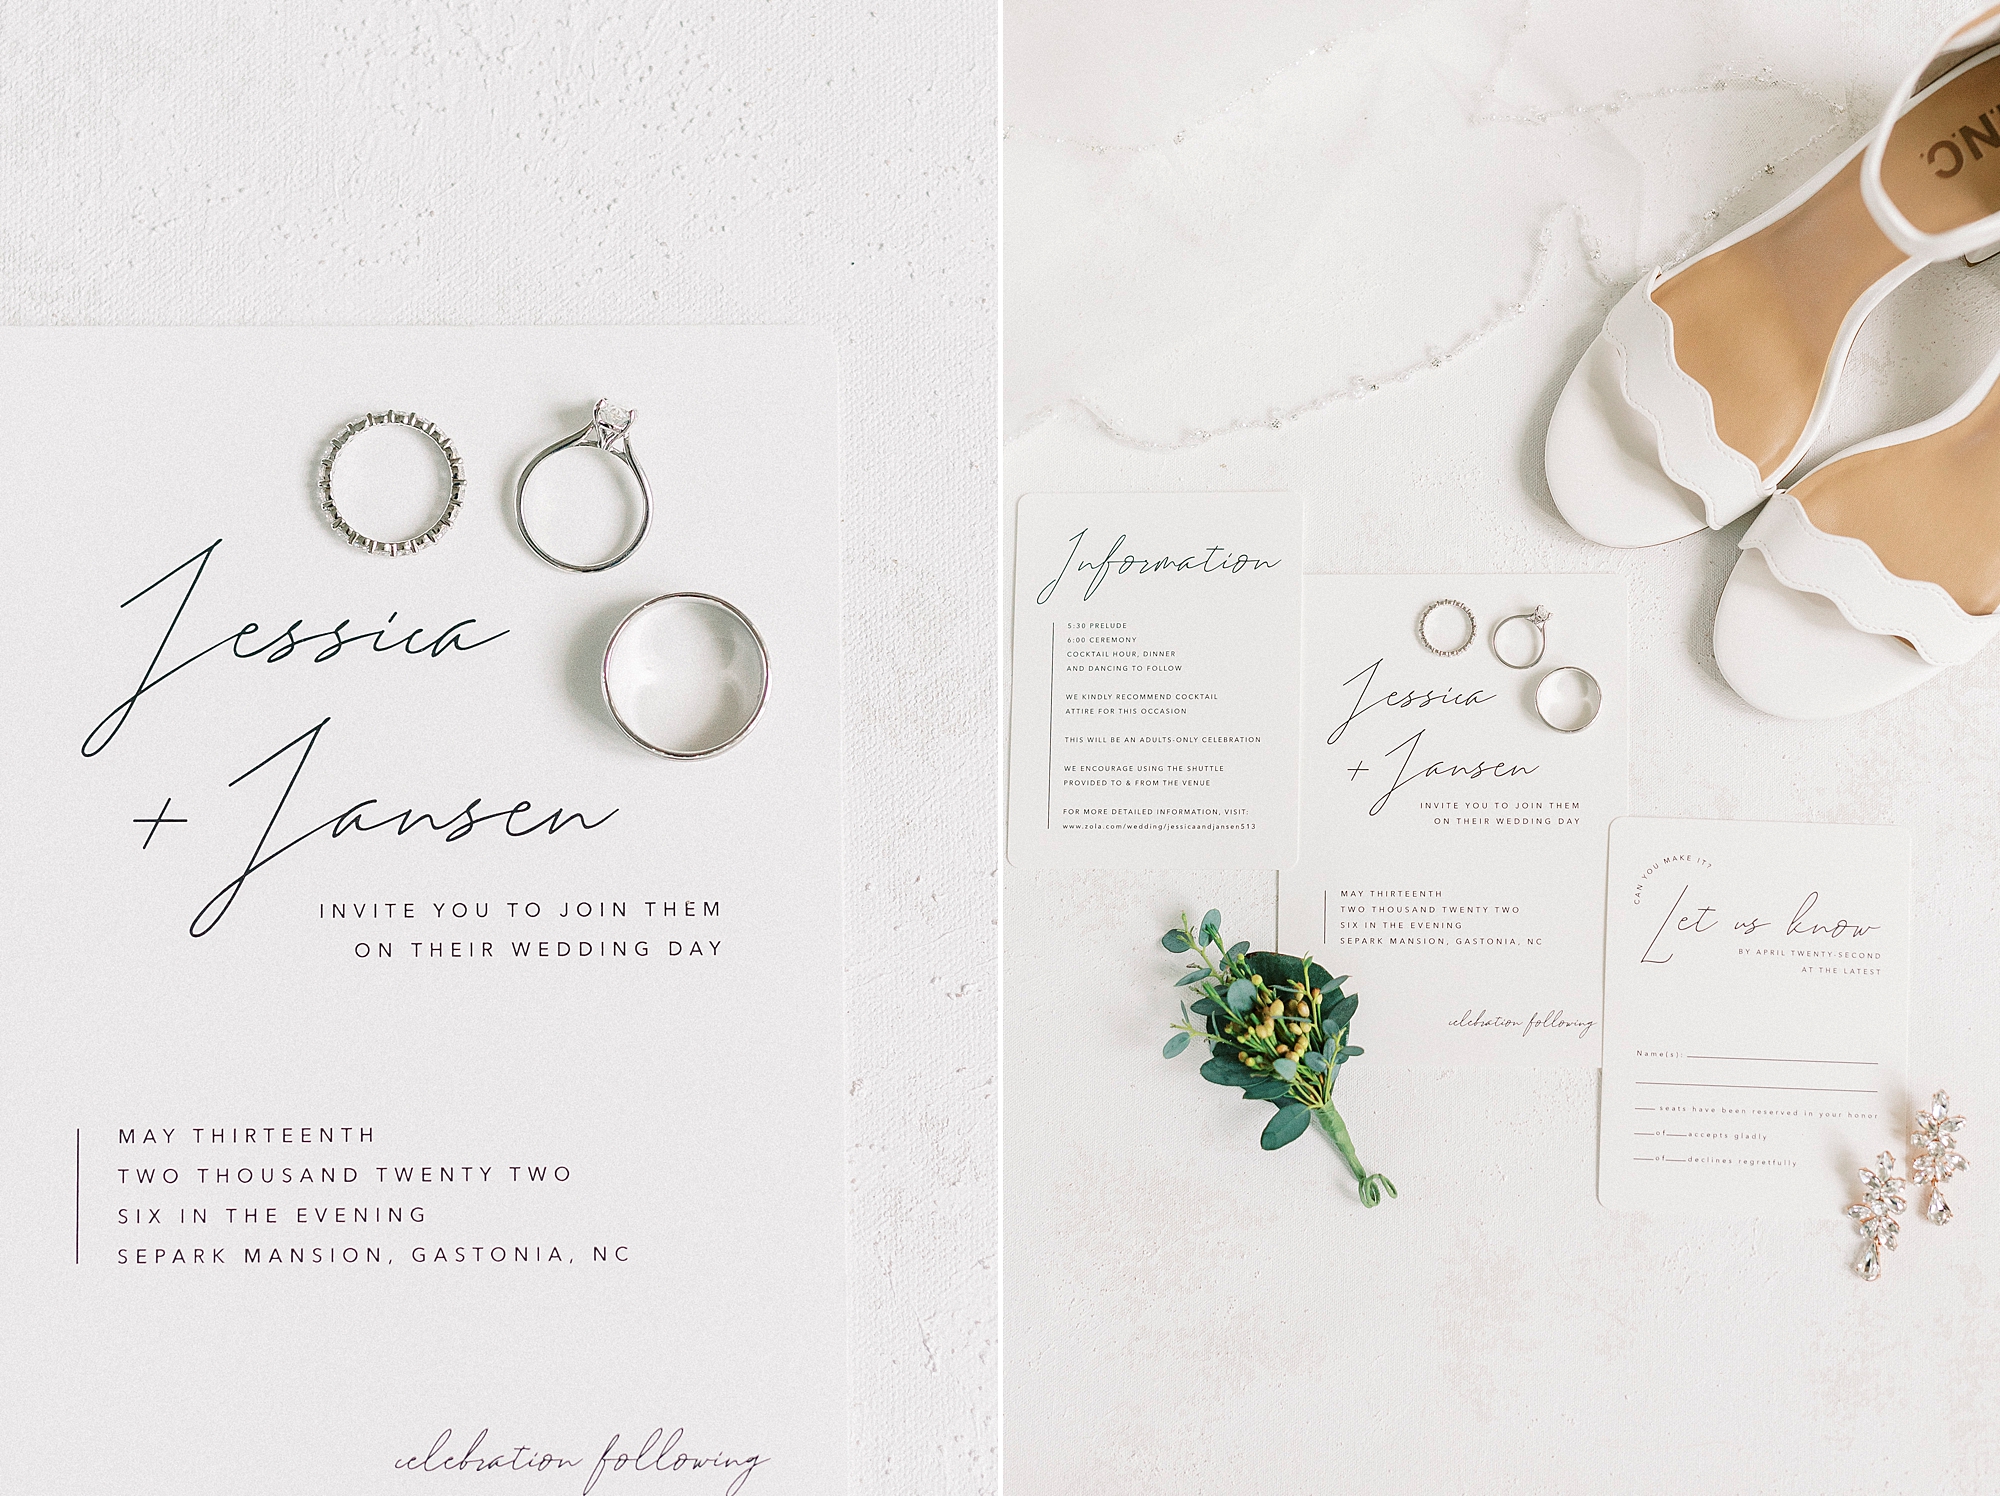 stationery and bride's shoes for summer wedding day 